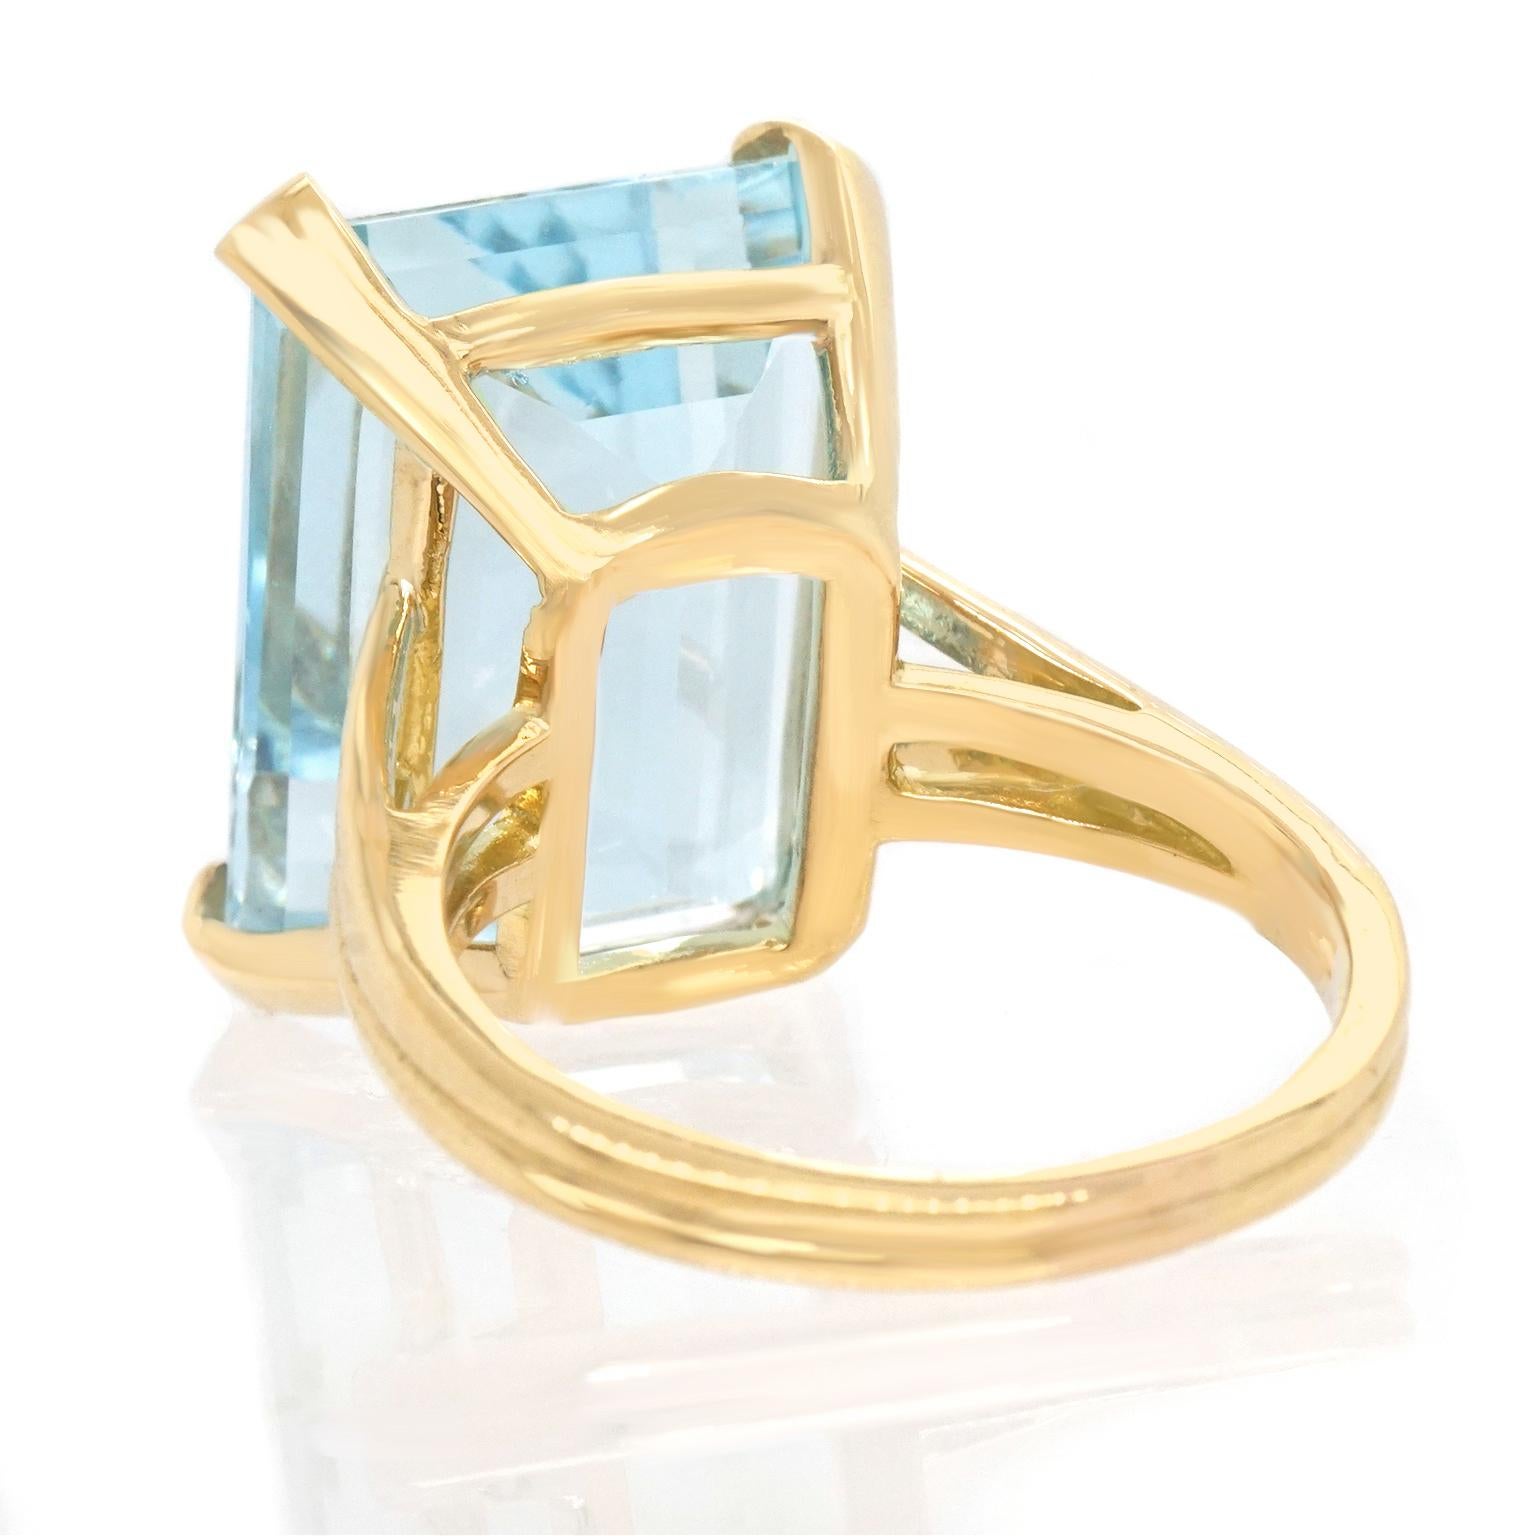 17.38 Carat Aquamarine Ring by Lawrence Jeffrey in Gold 2